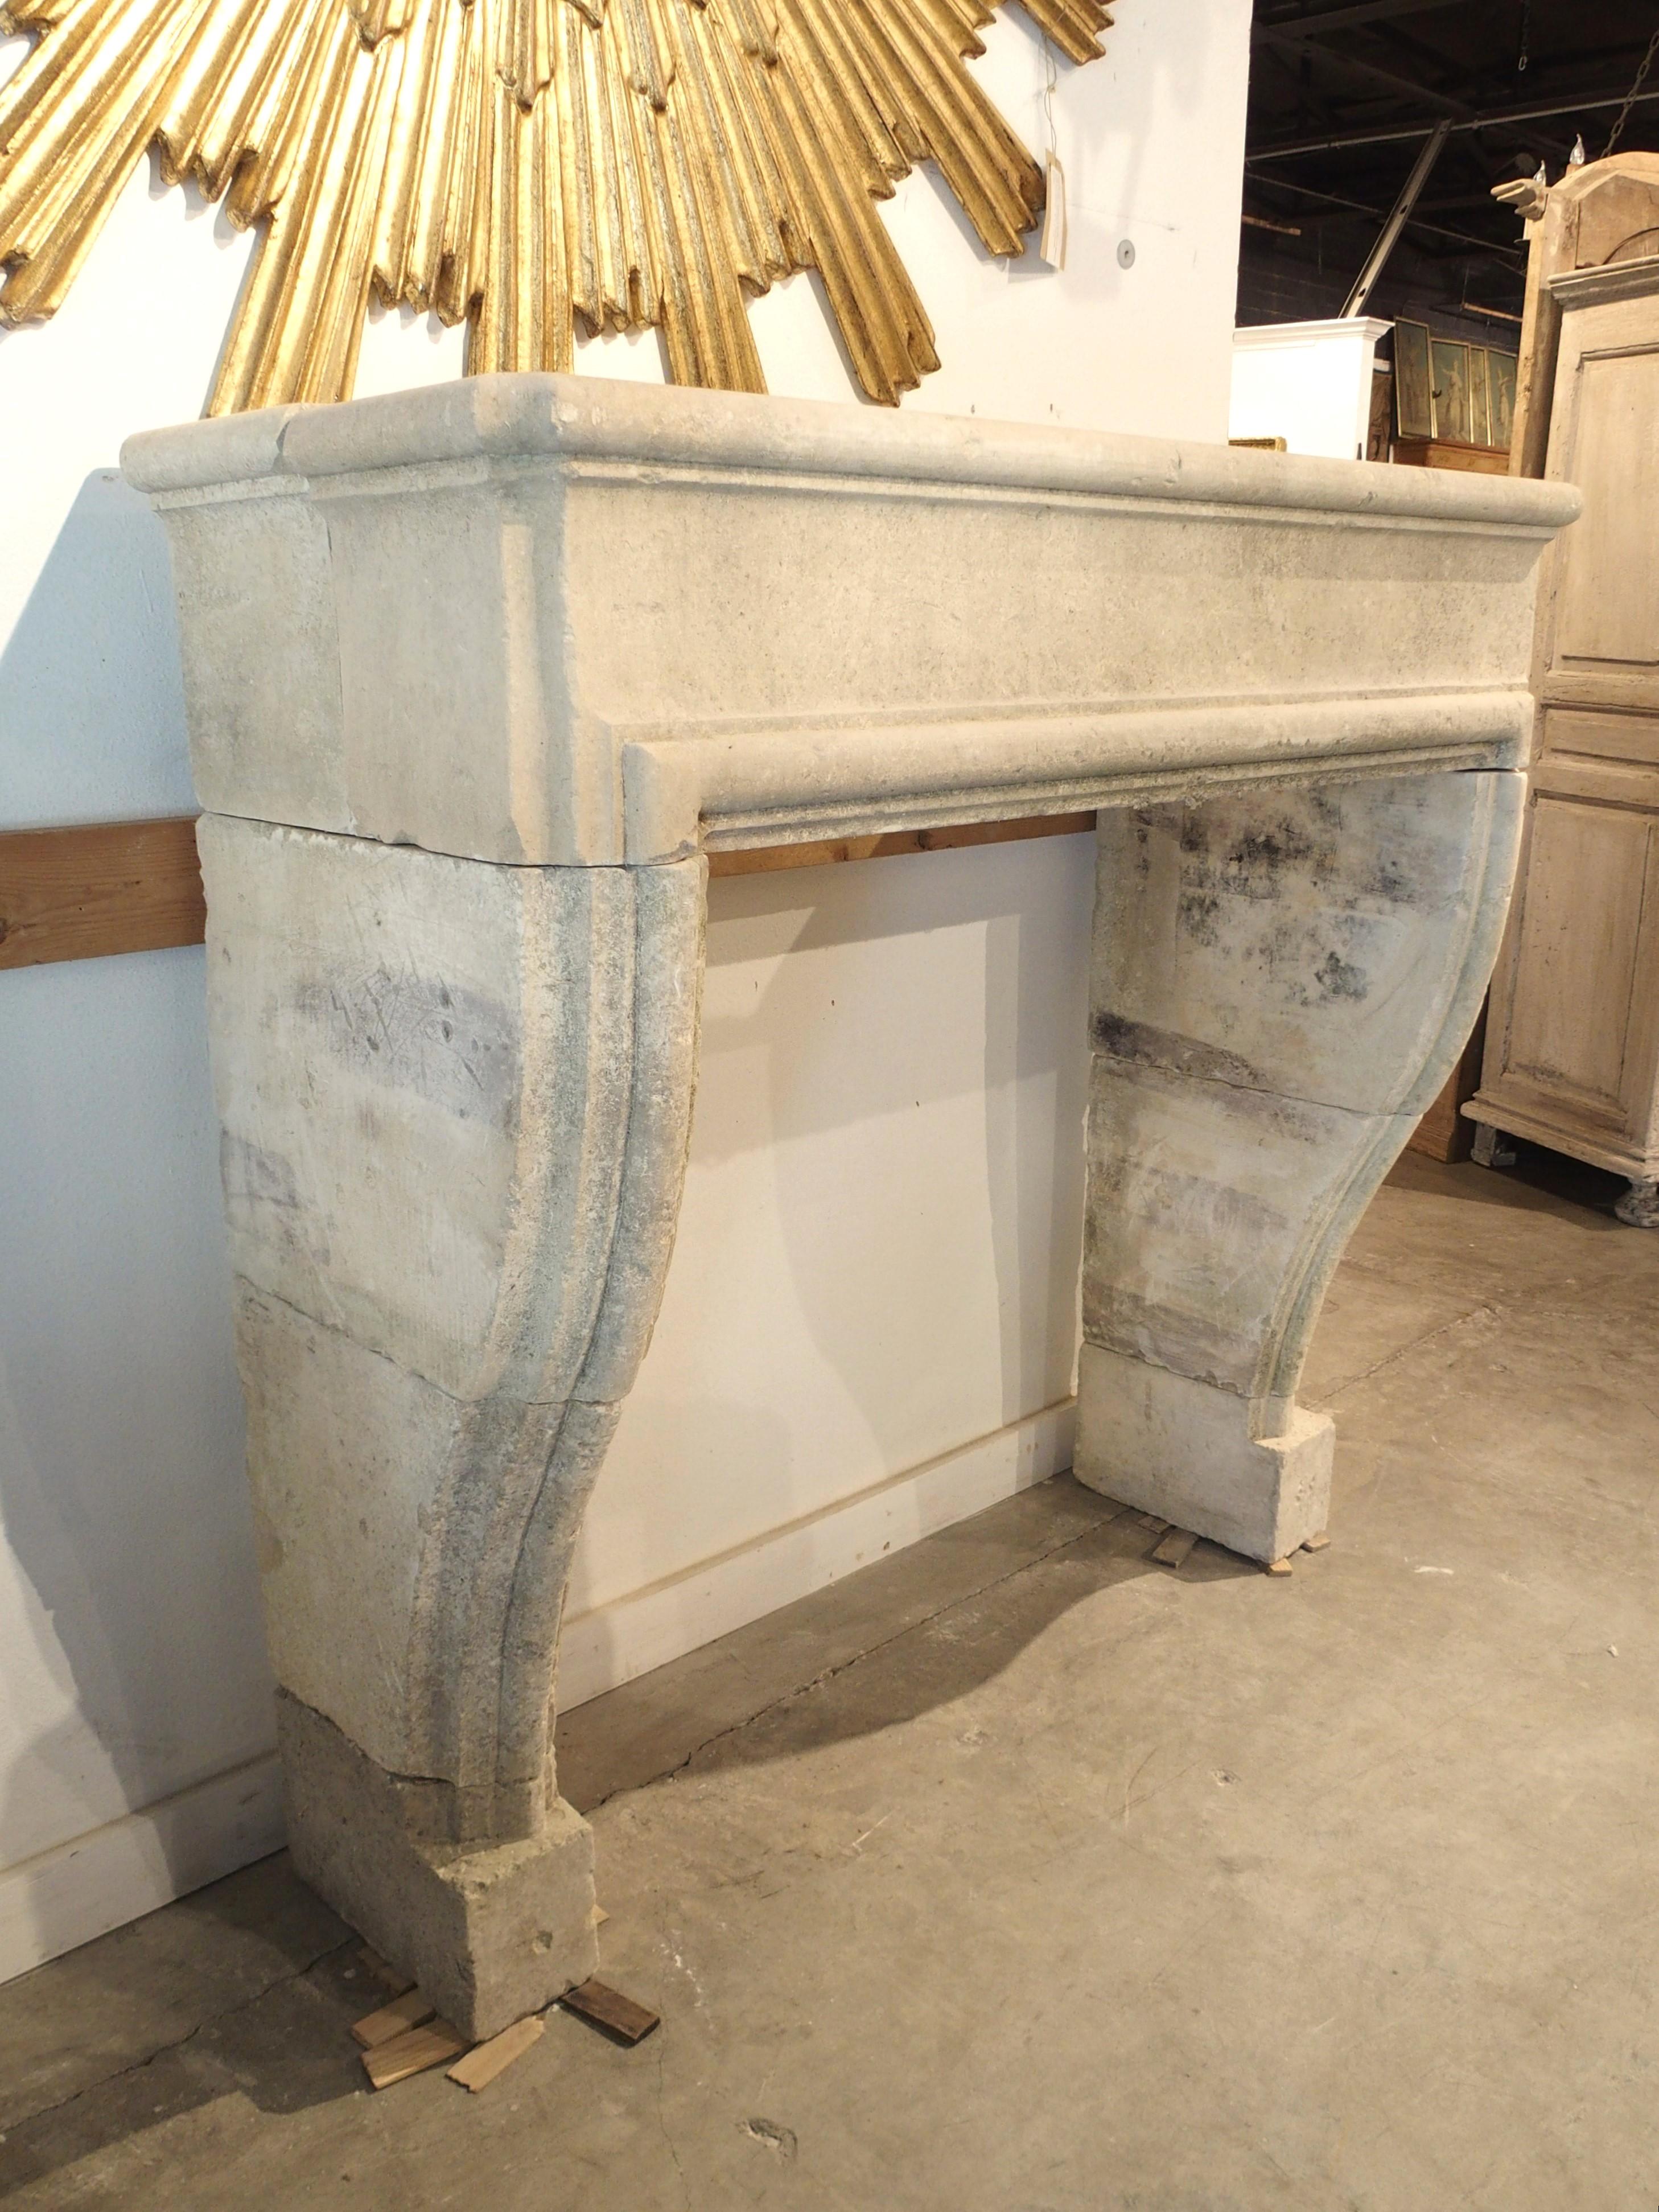 From Southern Italy, this elegant fireplace mantel has been hand-carved from nine pieces of limestone. The cream-colored stone has developed a nice black and gray patina and was intentionally distressed to give the appearance of antiquity. A